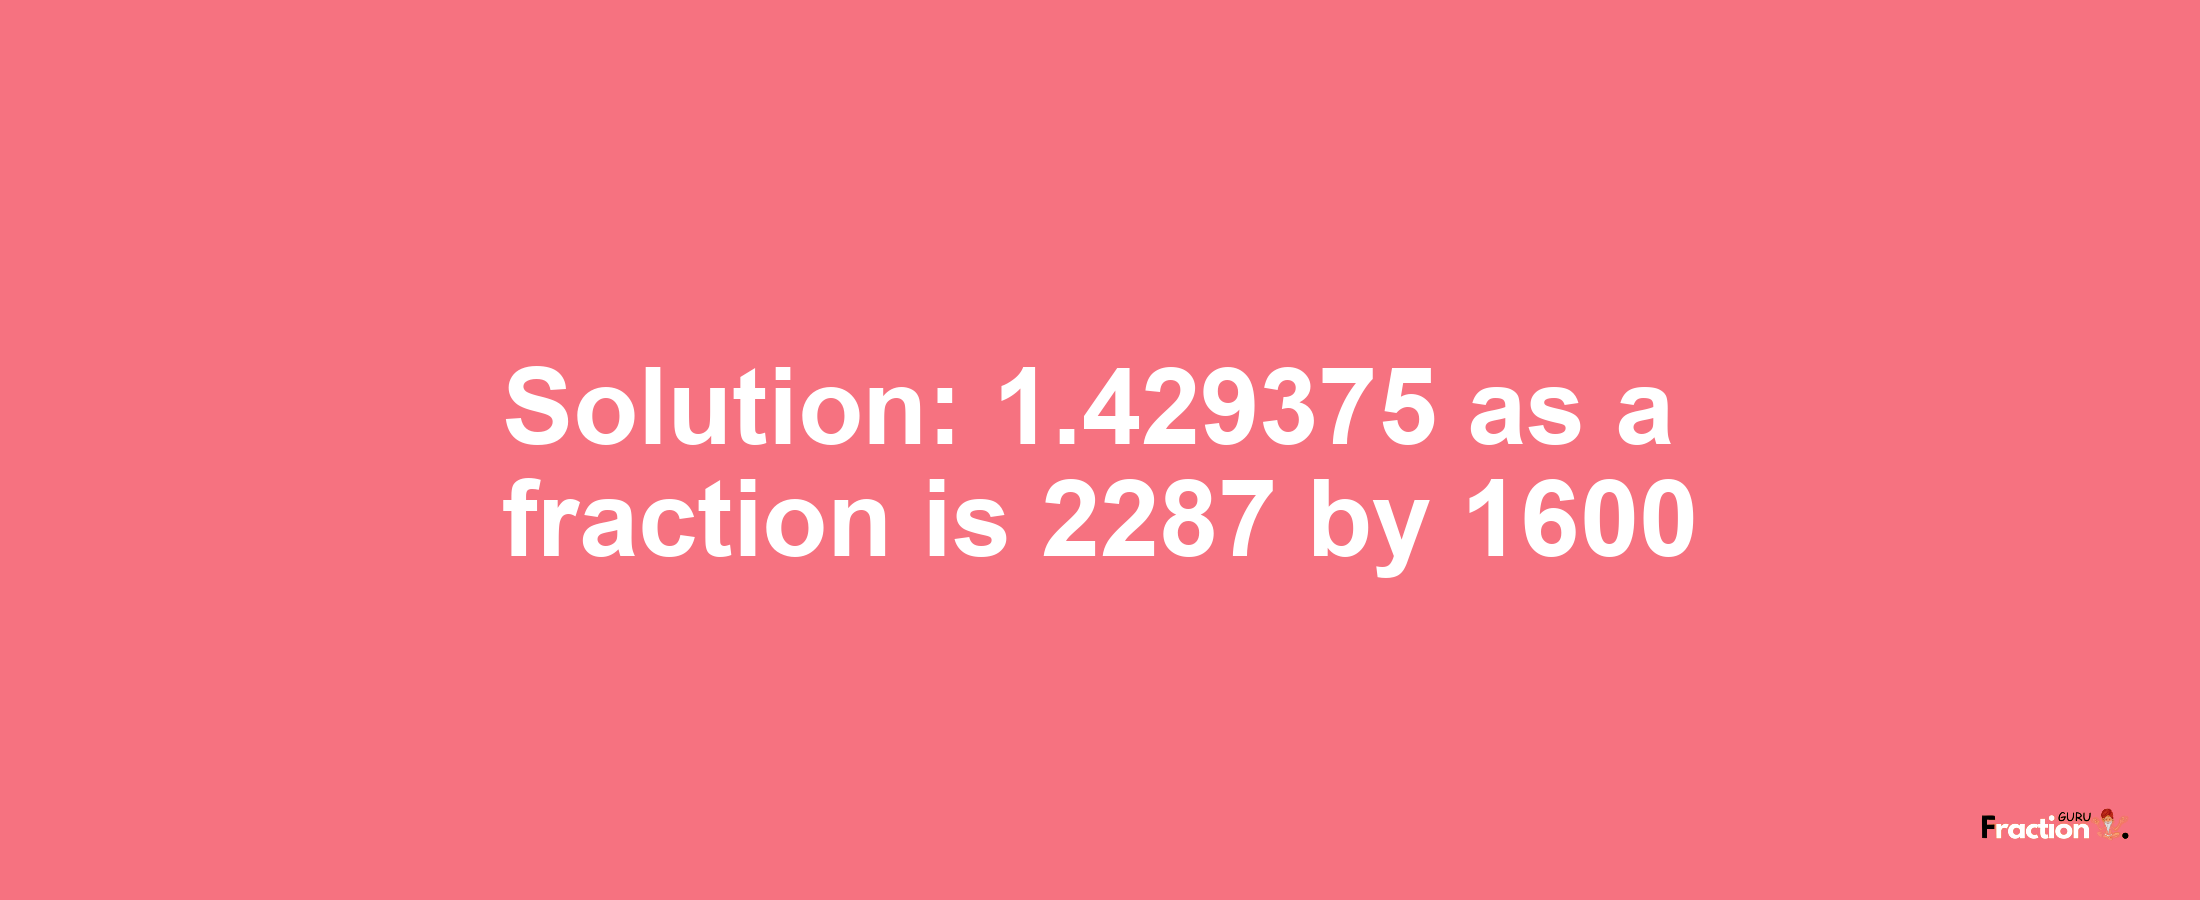 Solution:1.429375 as a fraction is 2287/1600